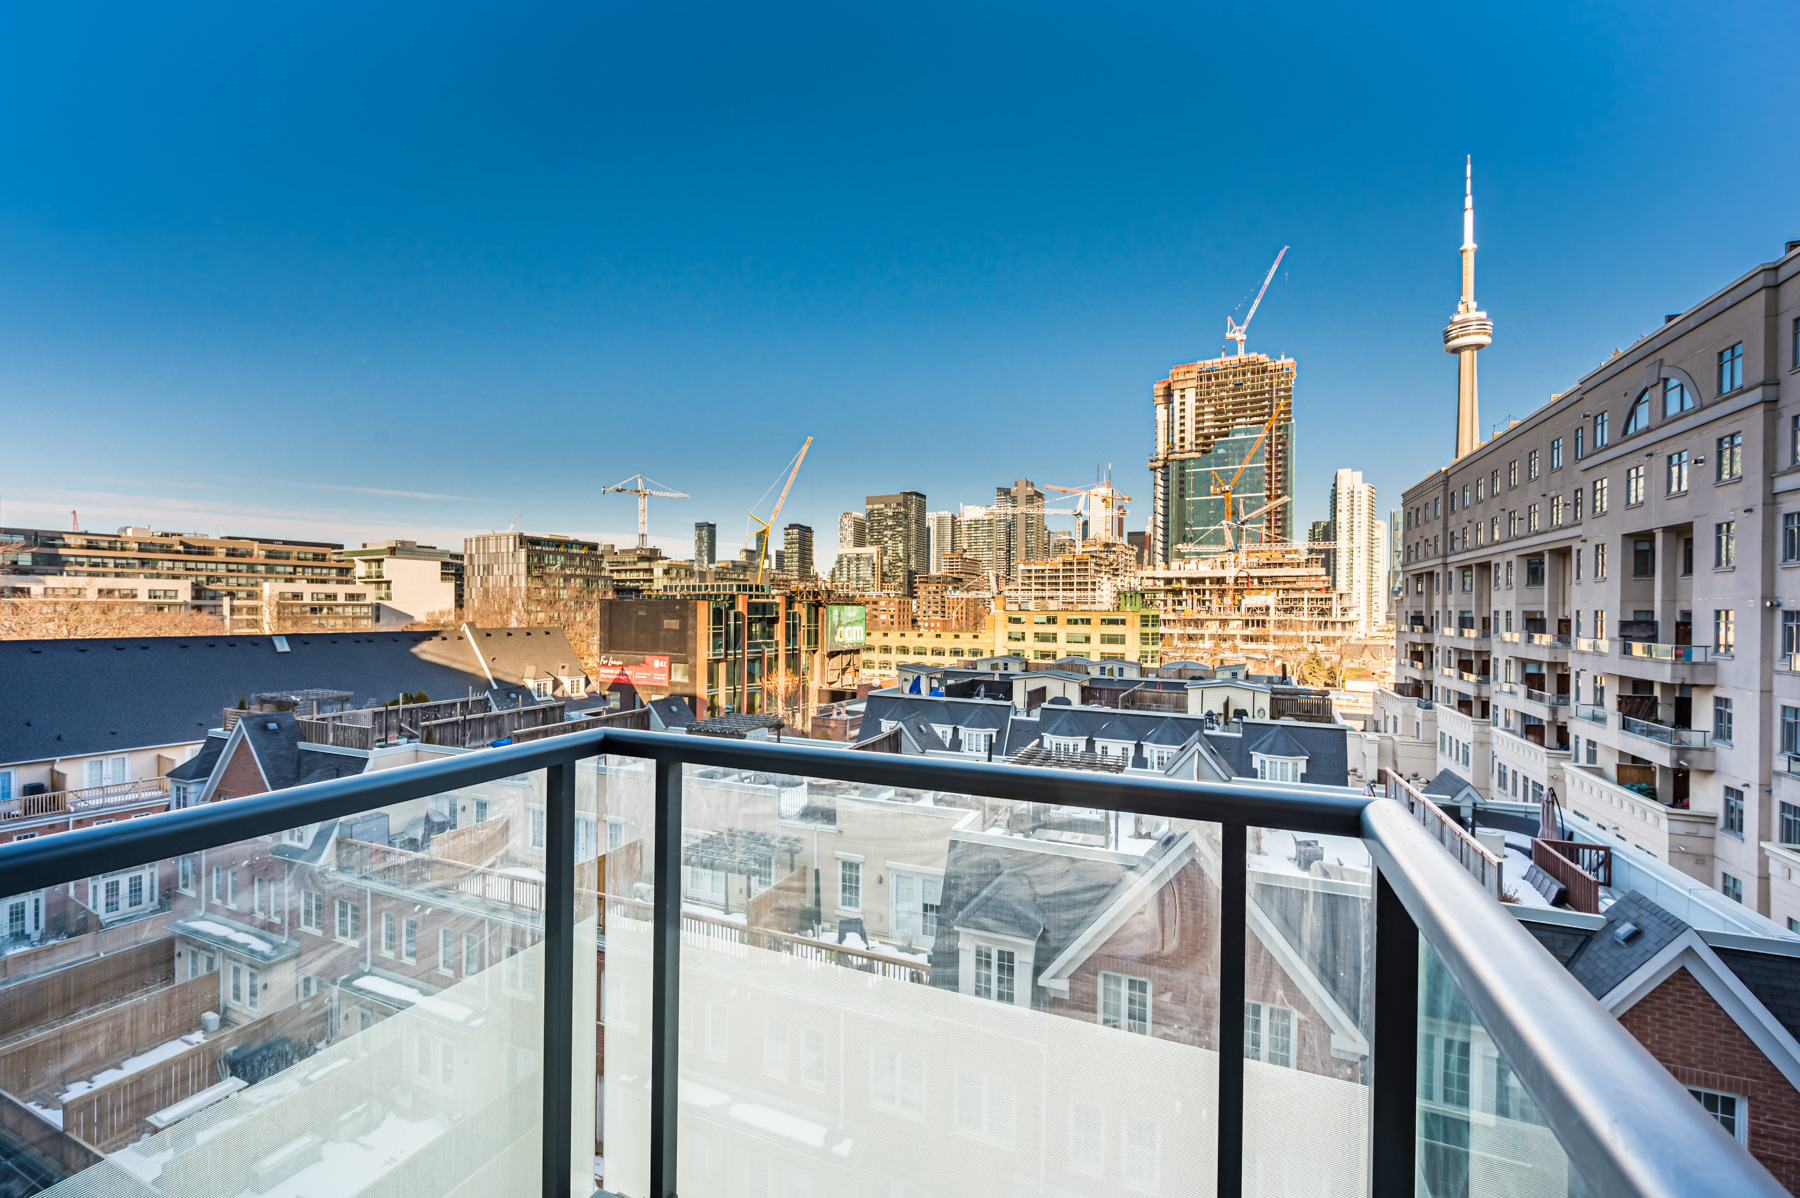 560 Front St W Unit 622 balcony with view of houses, condos and CN Tower in distance.